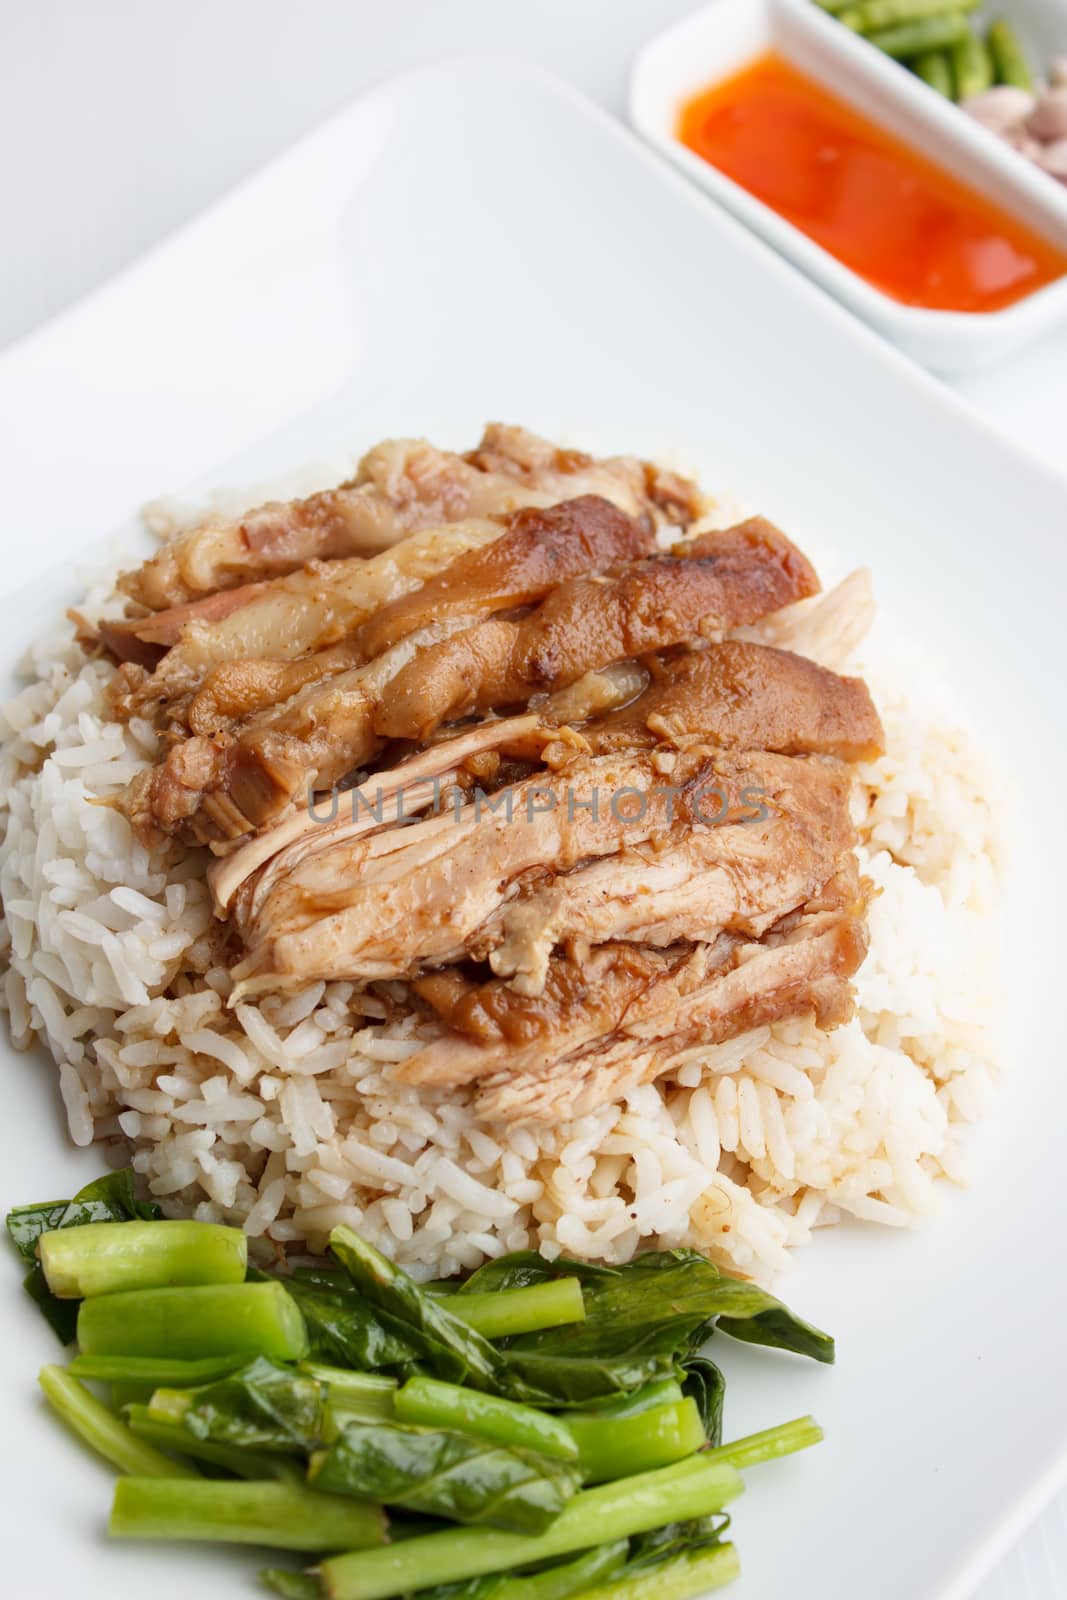 Pork leg with rice and  sauce isolated on white background